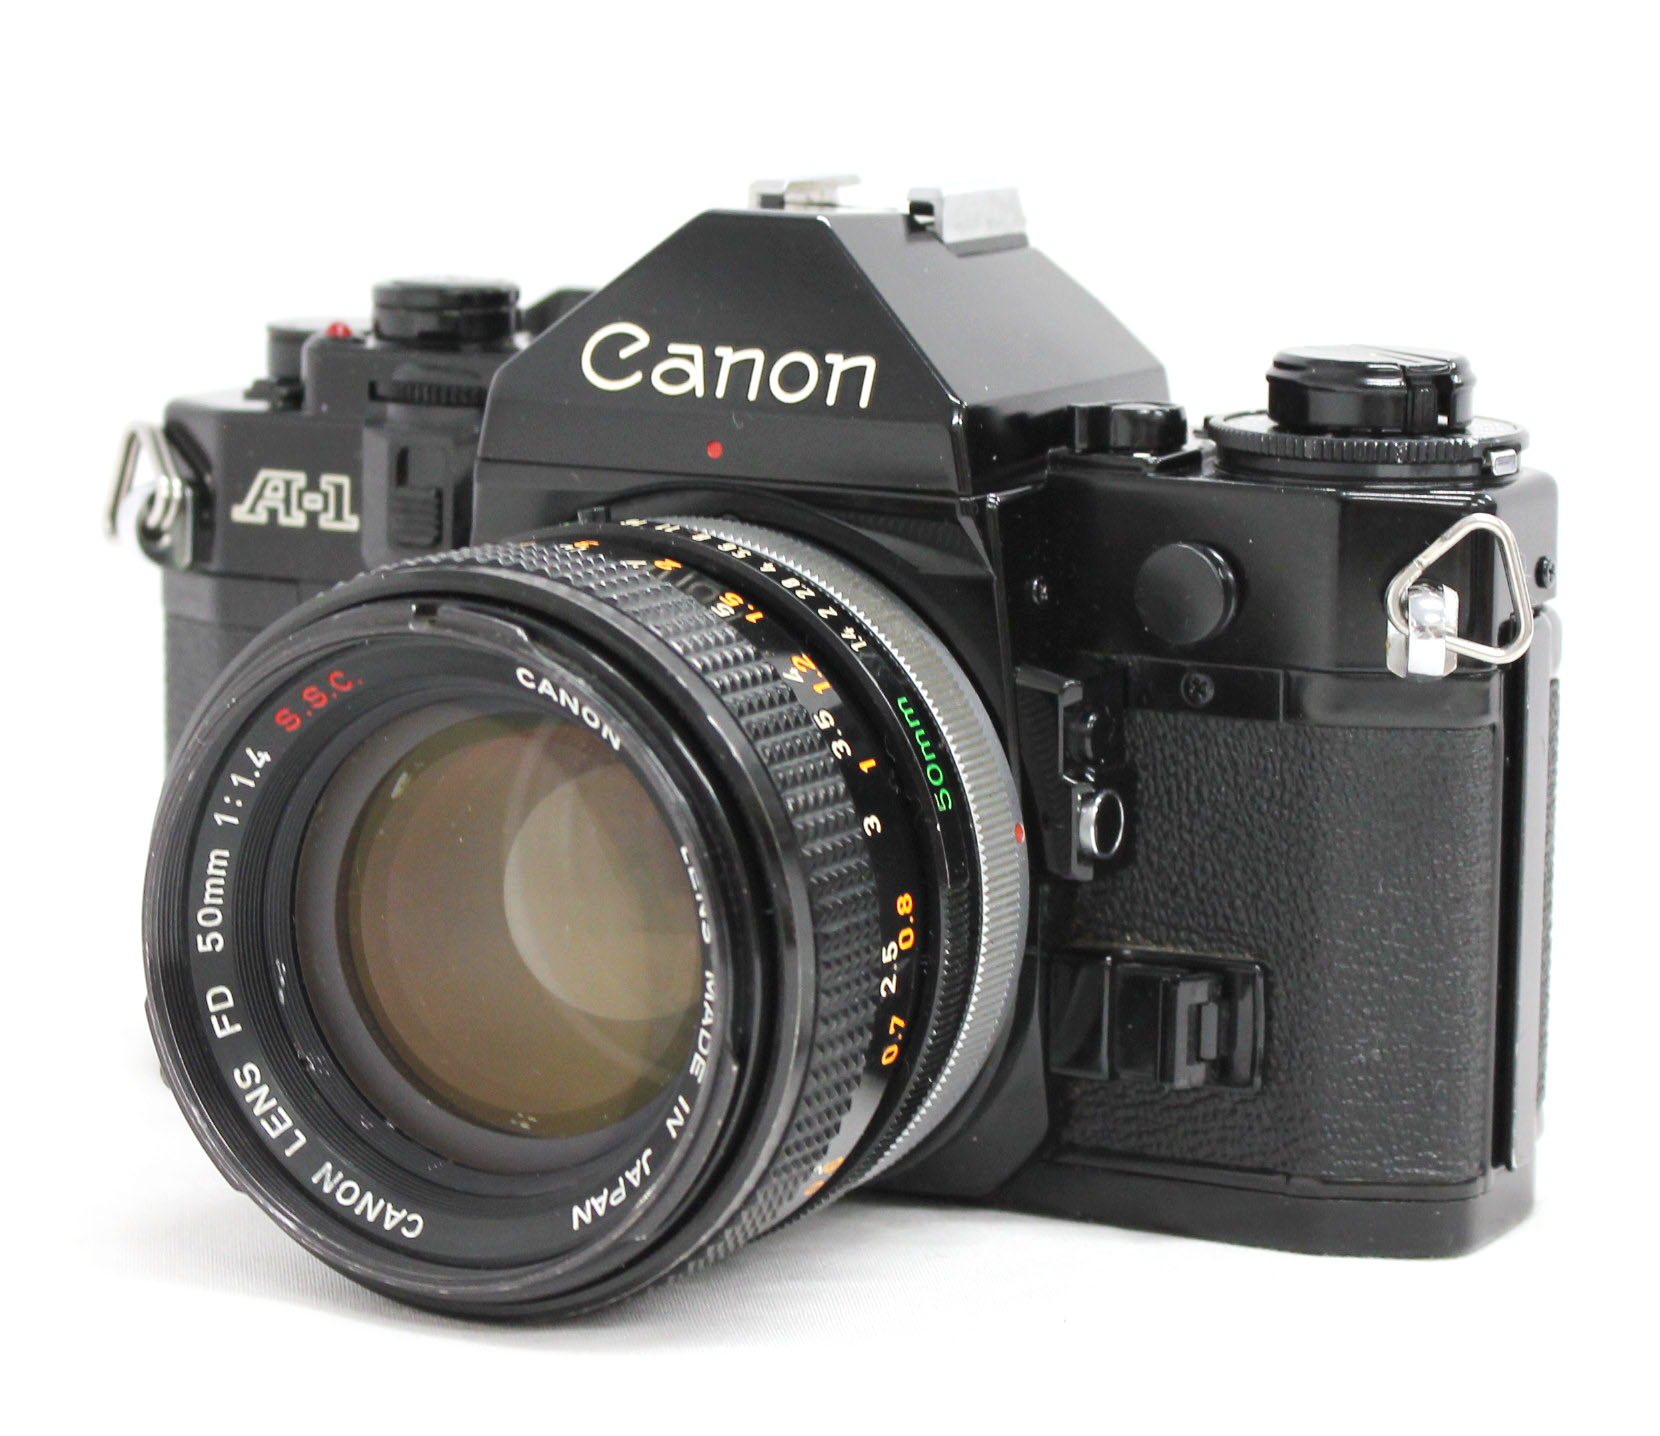  Canon A-1 35mm SLR Film Camera with FD 50mm F/1.4 S.S.C. Lens from Japan Photo 0